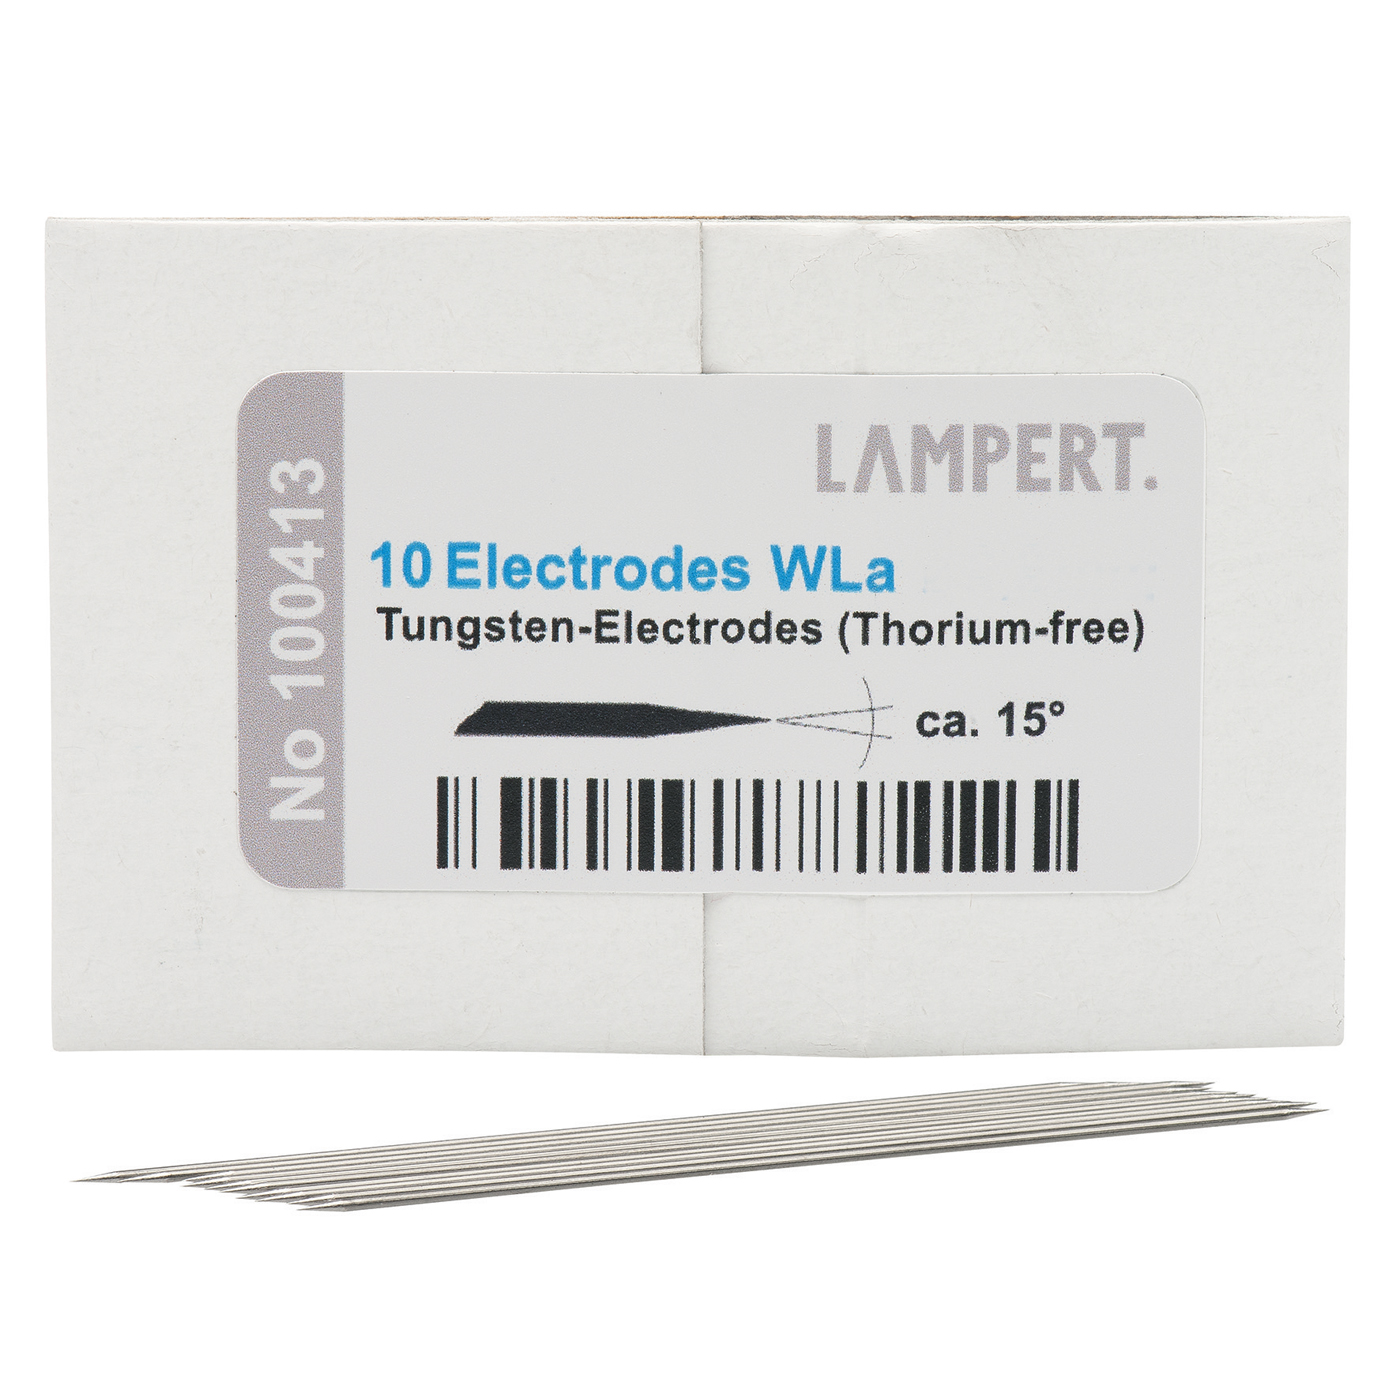 WLa Special Electrodes, 0.6 x 50 mm - 10 pieces